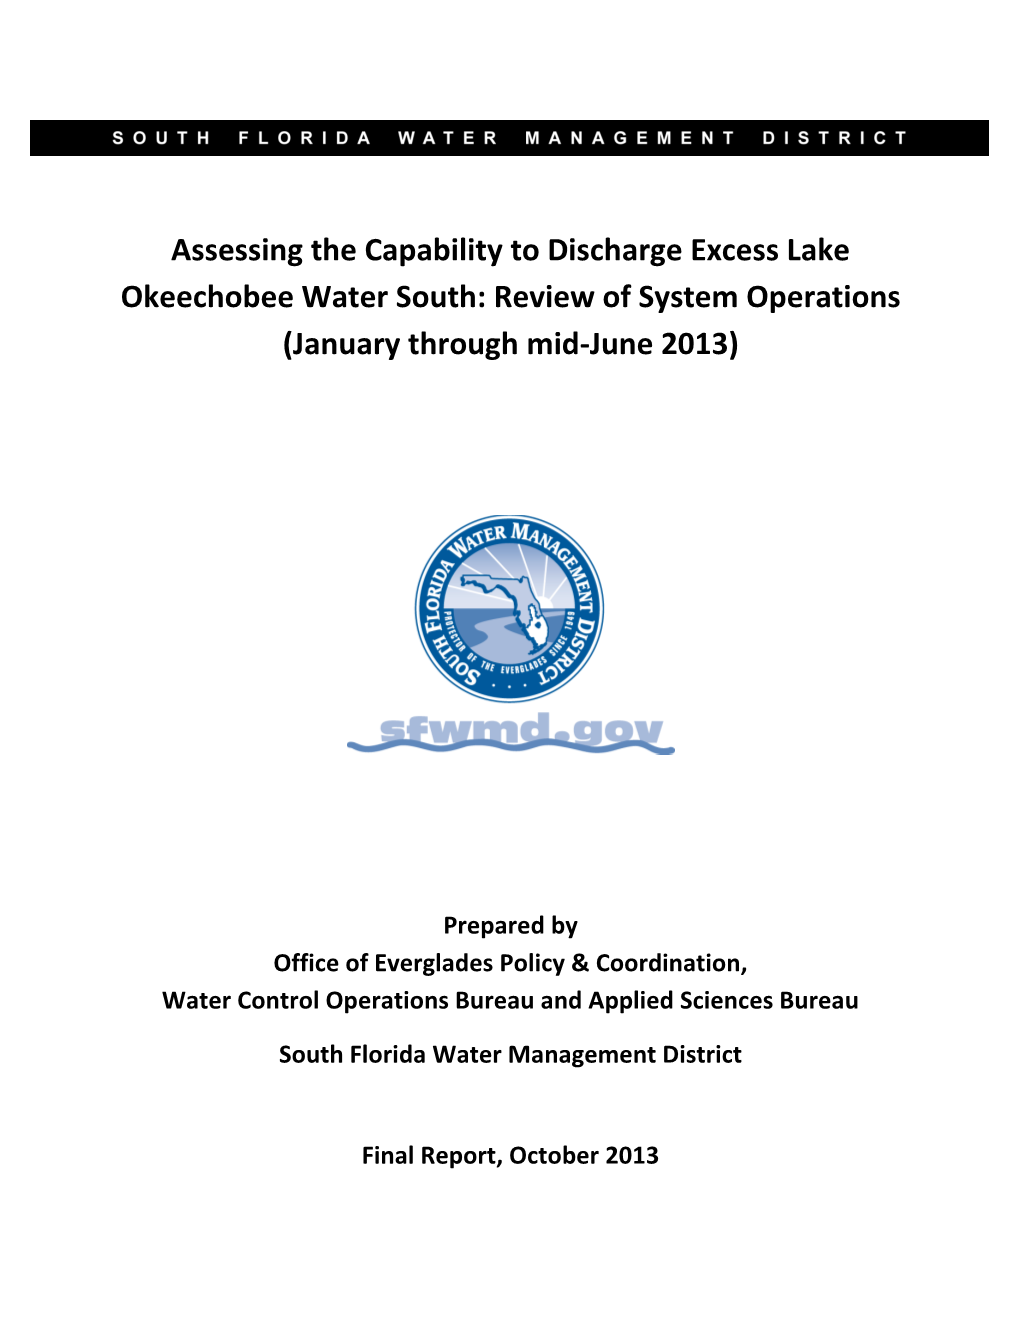 Assessing the Capability to Discharge Excess Lake Okeechobee Water South: Review of System Operations (January Through Mid-June 2013)